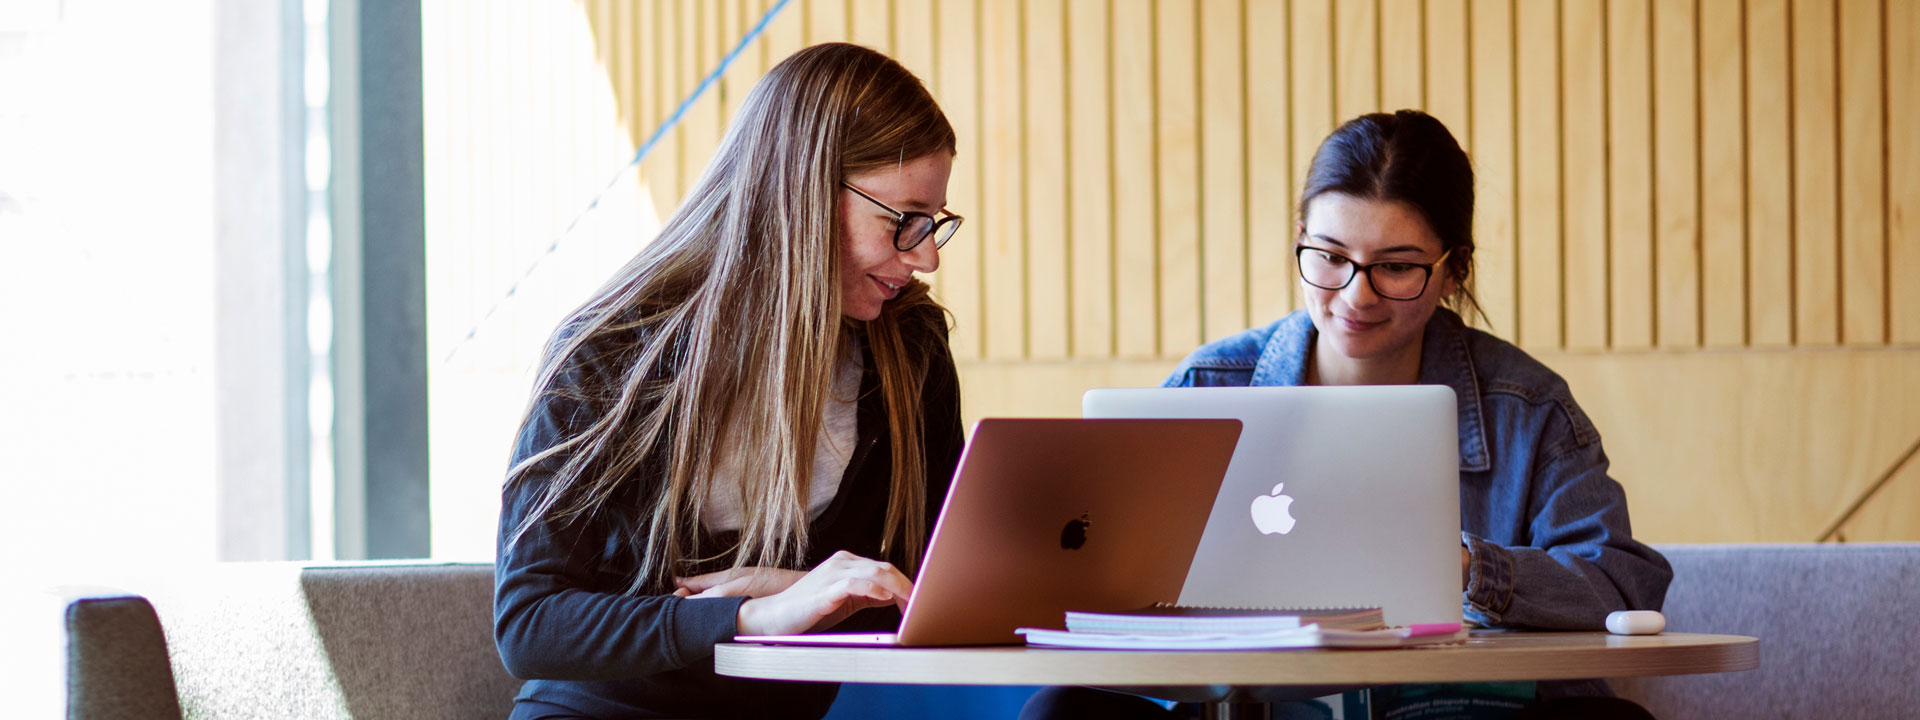 Two female students studying at a table with laptops.